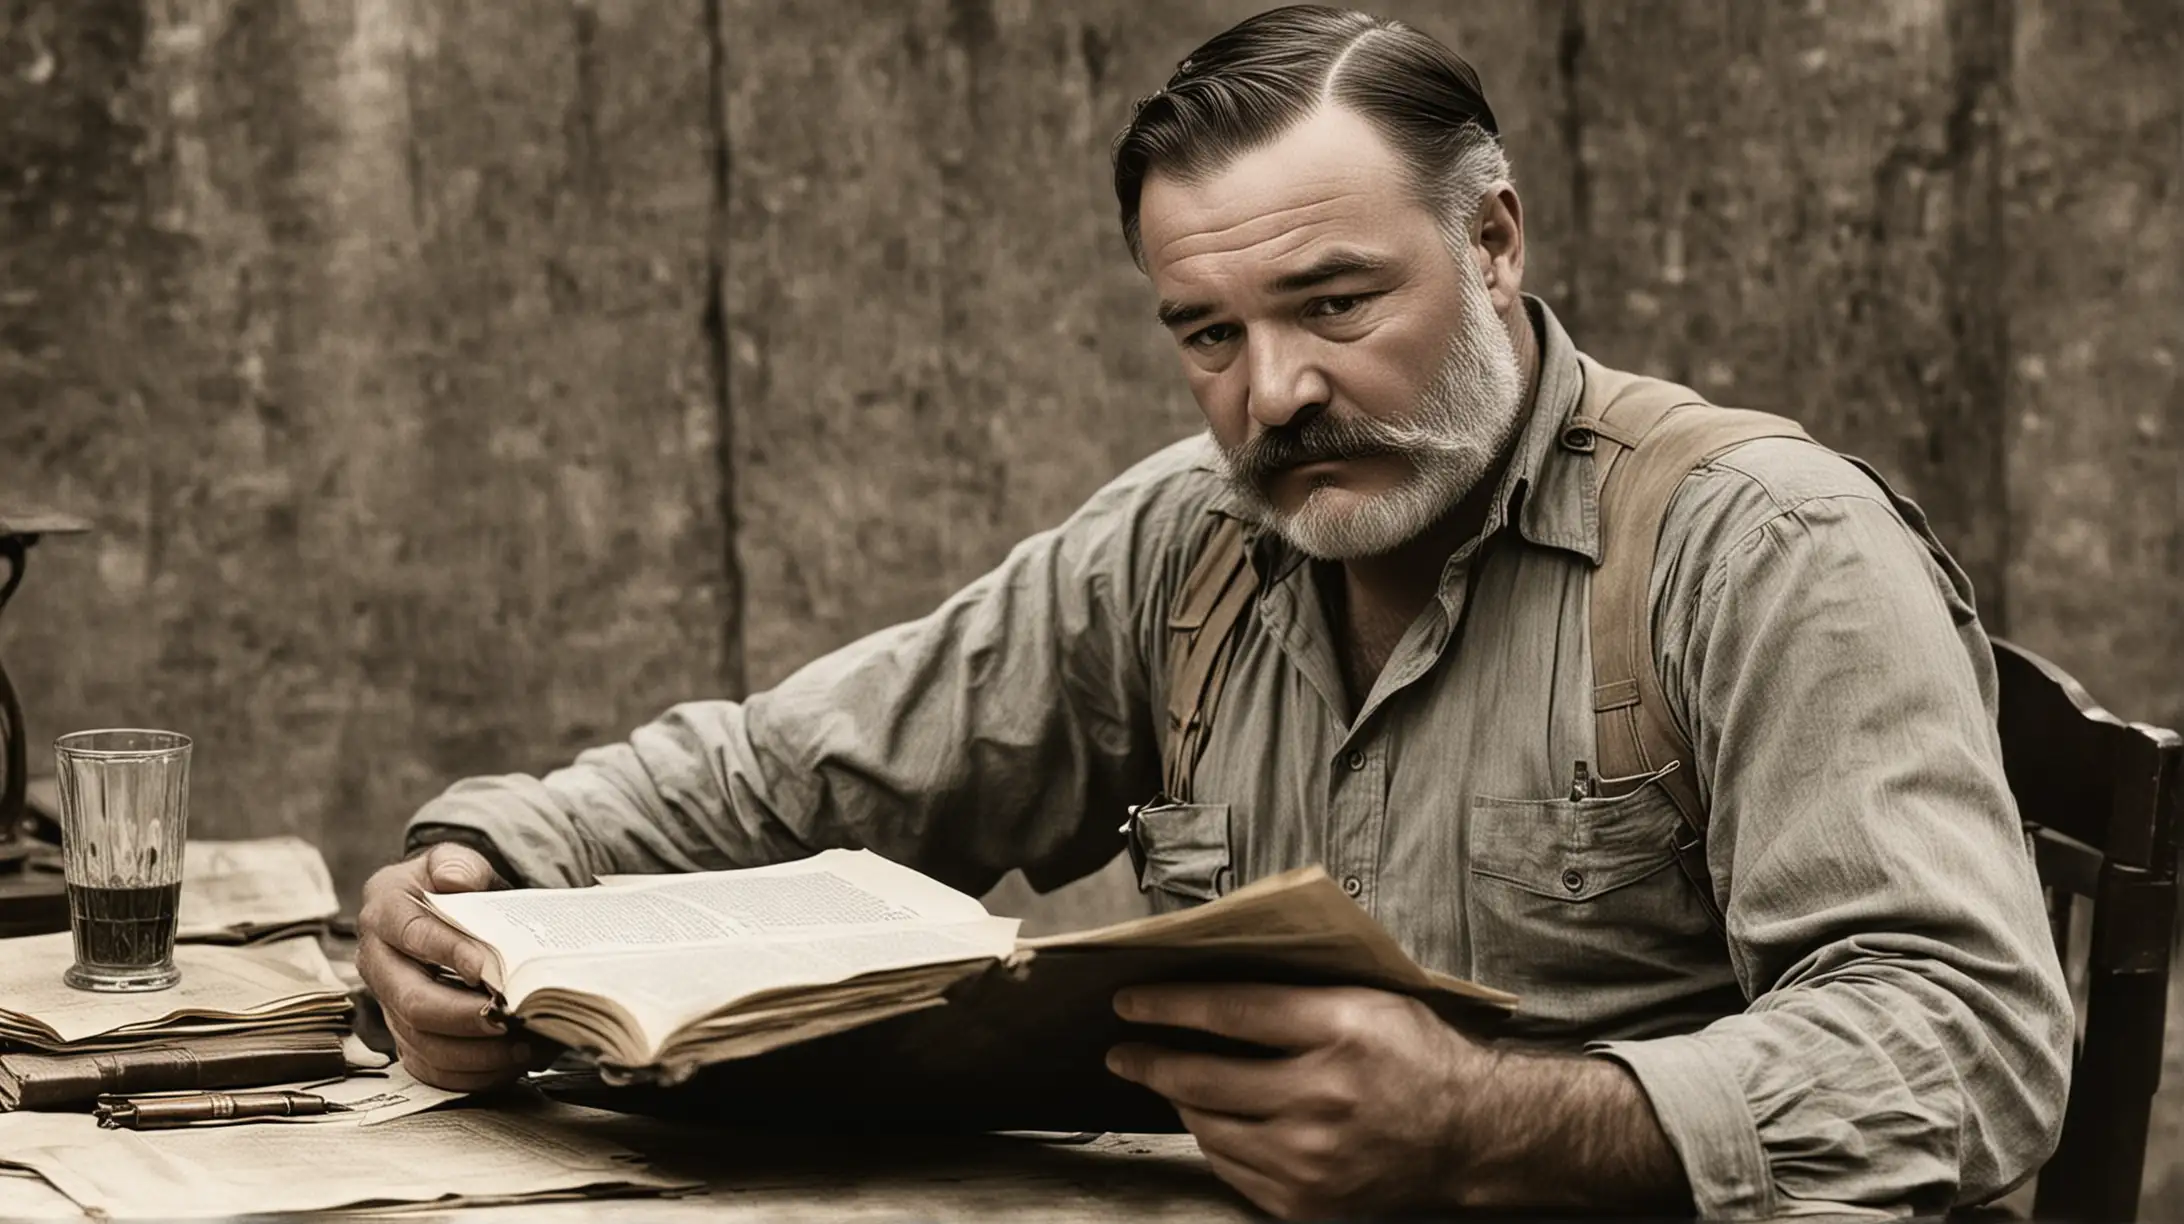 Ernest Hemingway Reading A Farewell to Arms in 1917 Vintage HandColored Silent Film Style